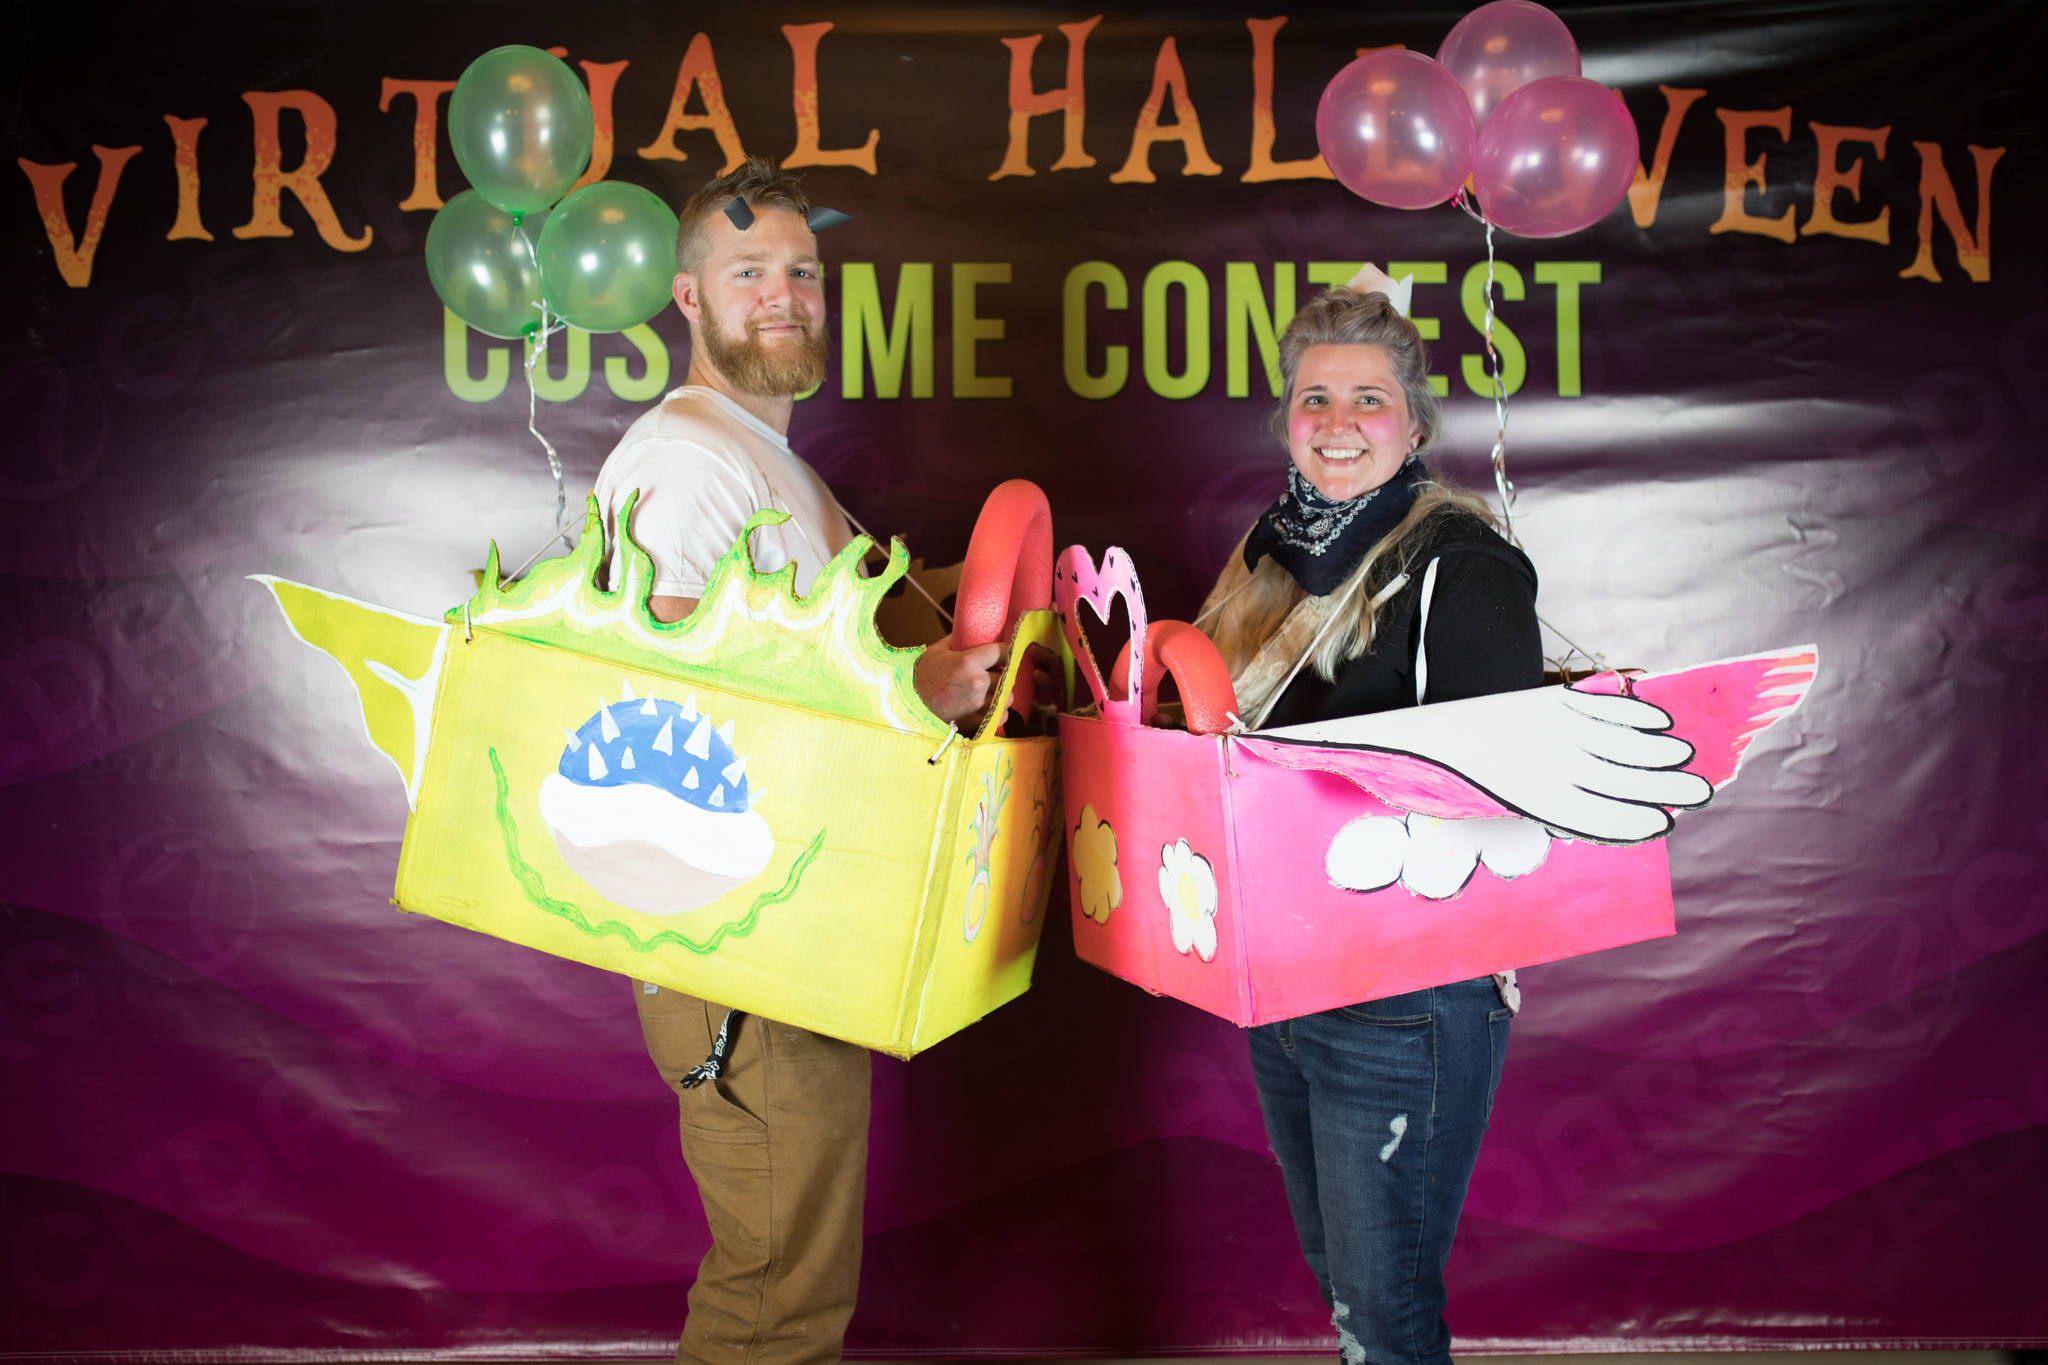 Scott Griffin and Kori Morgan won third place and $200 in 7 Cedars Casino’s virtual costume contest for Mario Kart as Bowser and Princess Peach. Photo by Stephanie Gray Photography